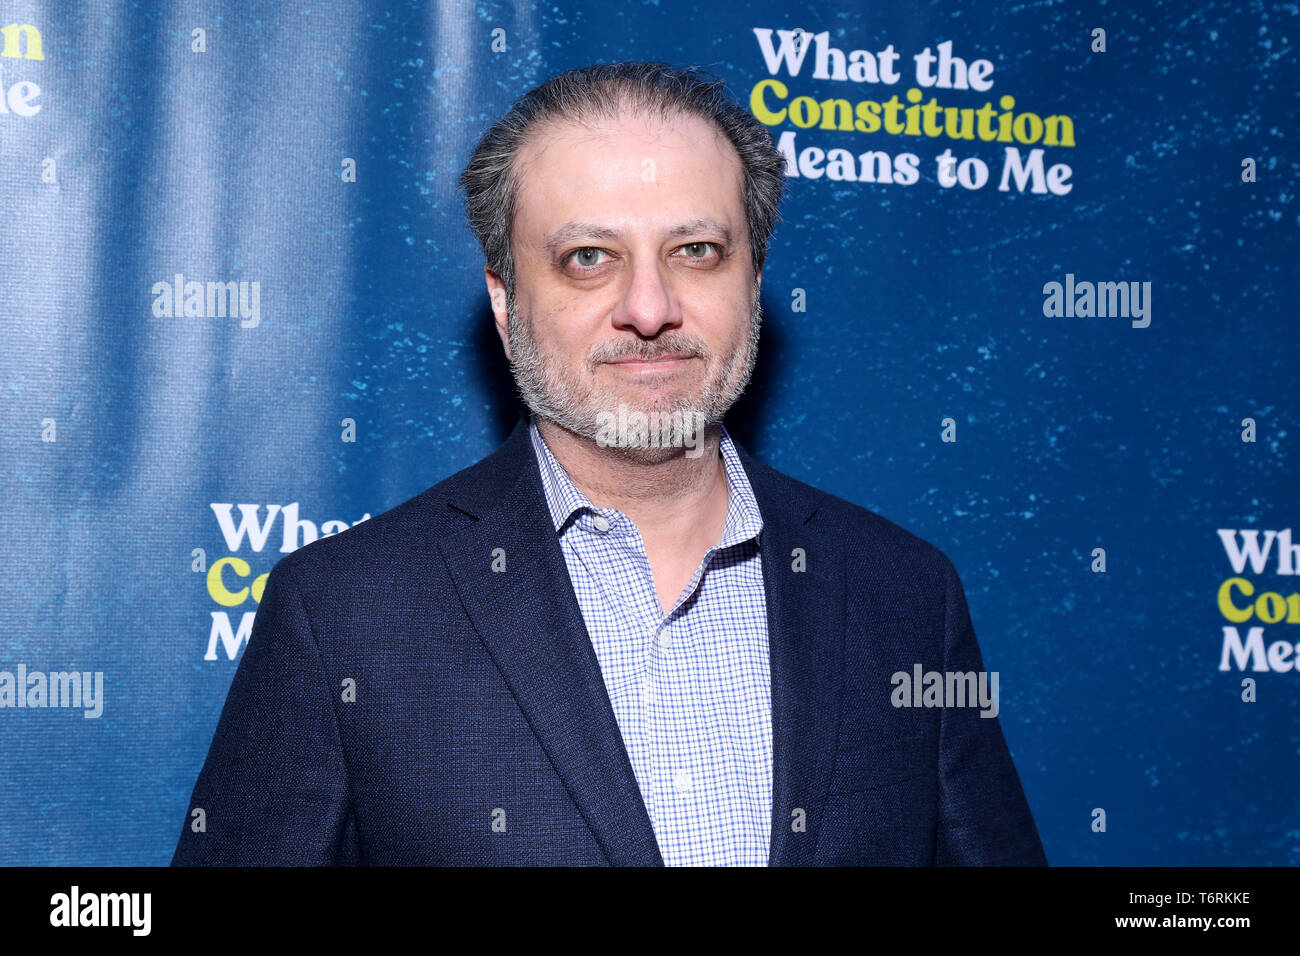 Opening night for What The Constitution Means To Me at the Helen Hayes Theatre - Arrivals.  Featuring: Preet Bharara Where: New York, New York, United States When: 31 Mar 2019 Credit: Joseph Marzullo/WENN.com Stock Photo